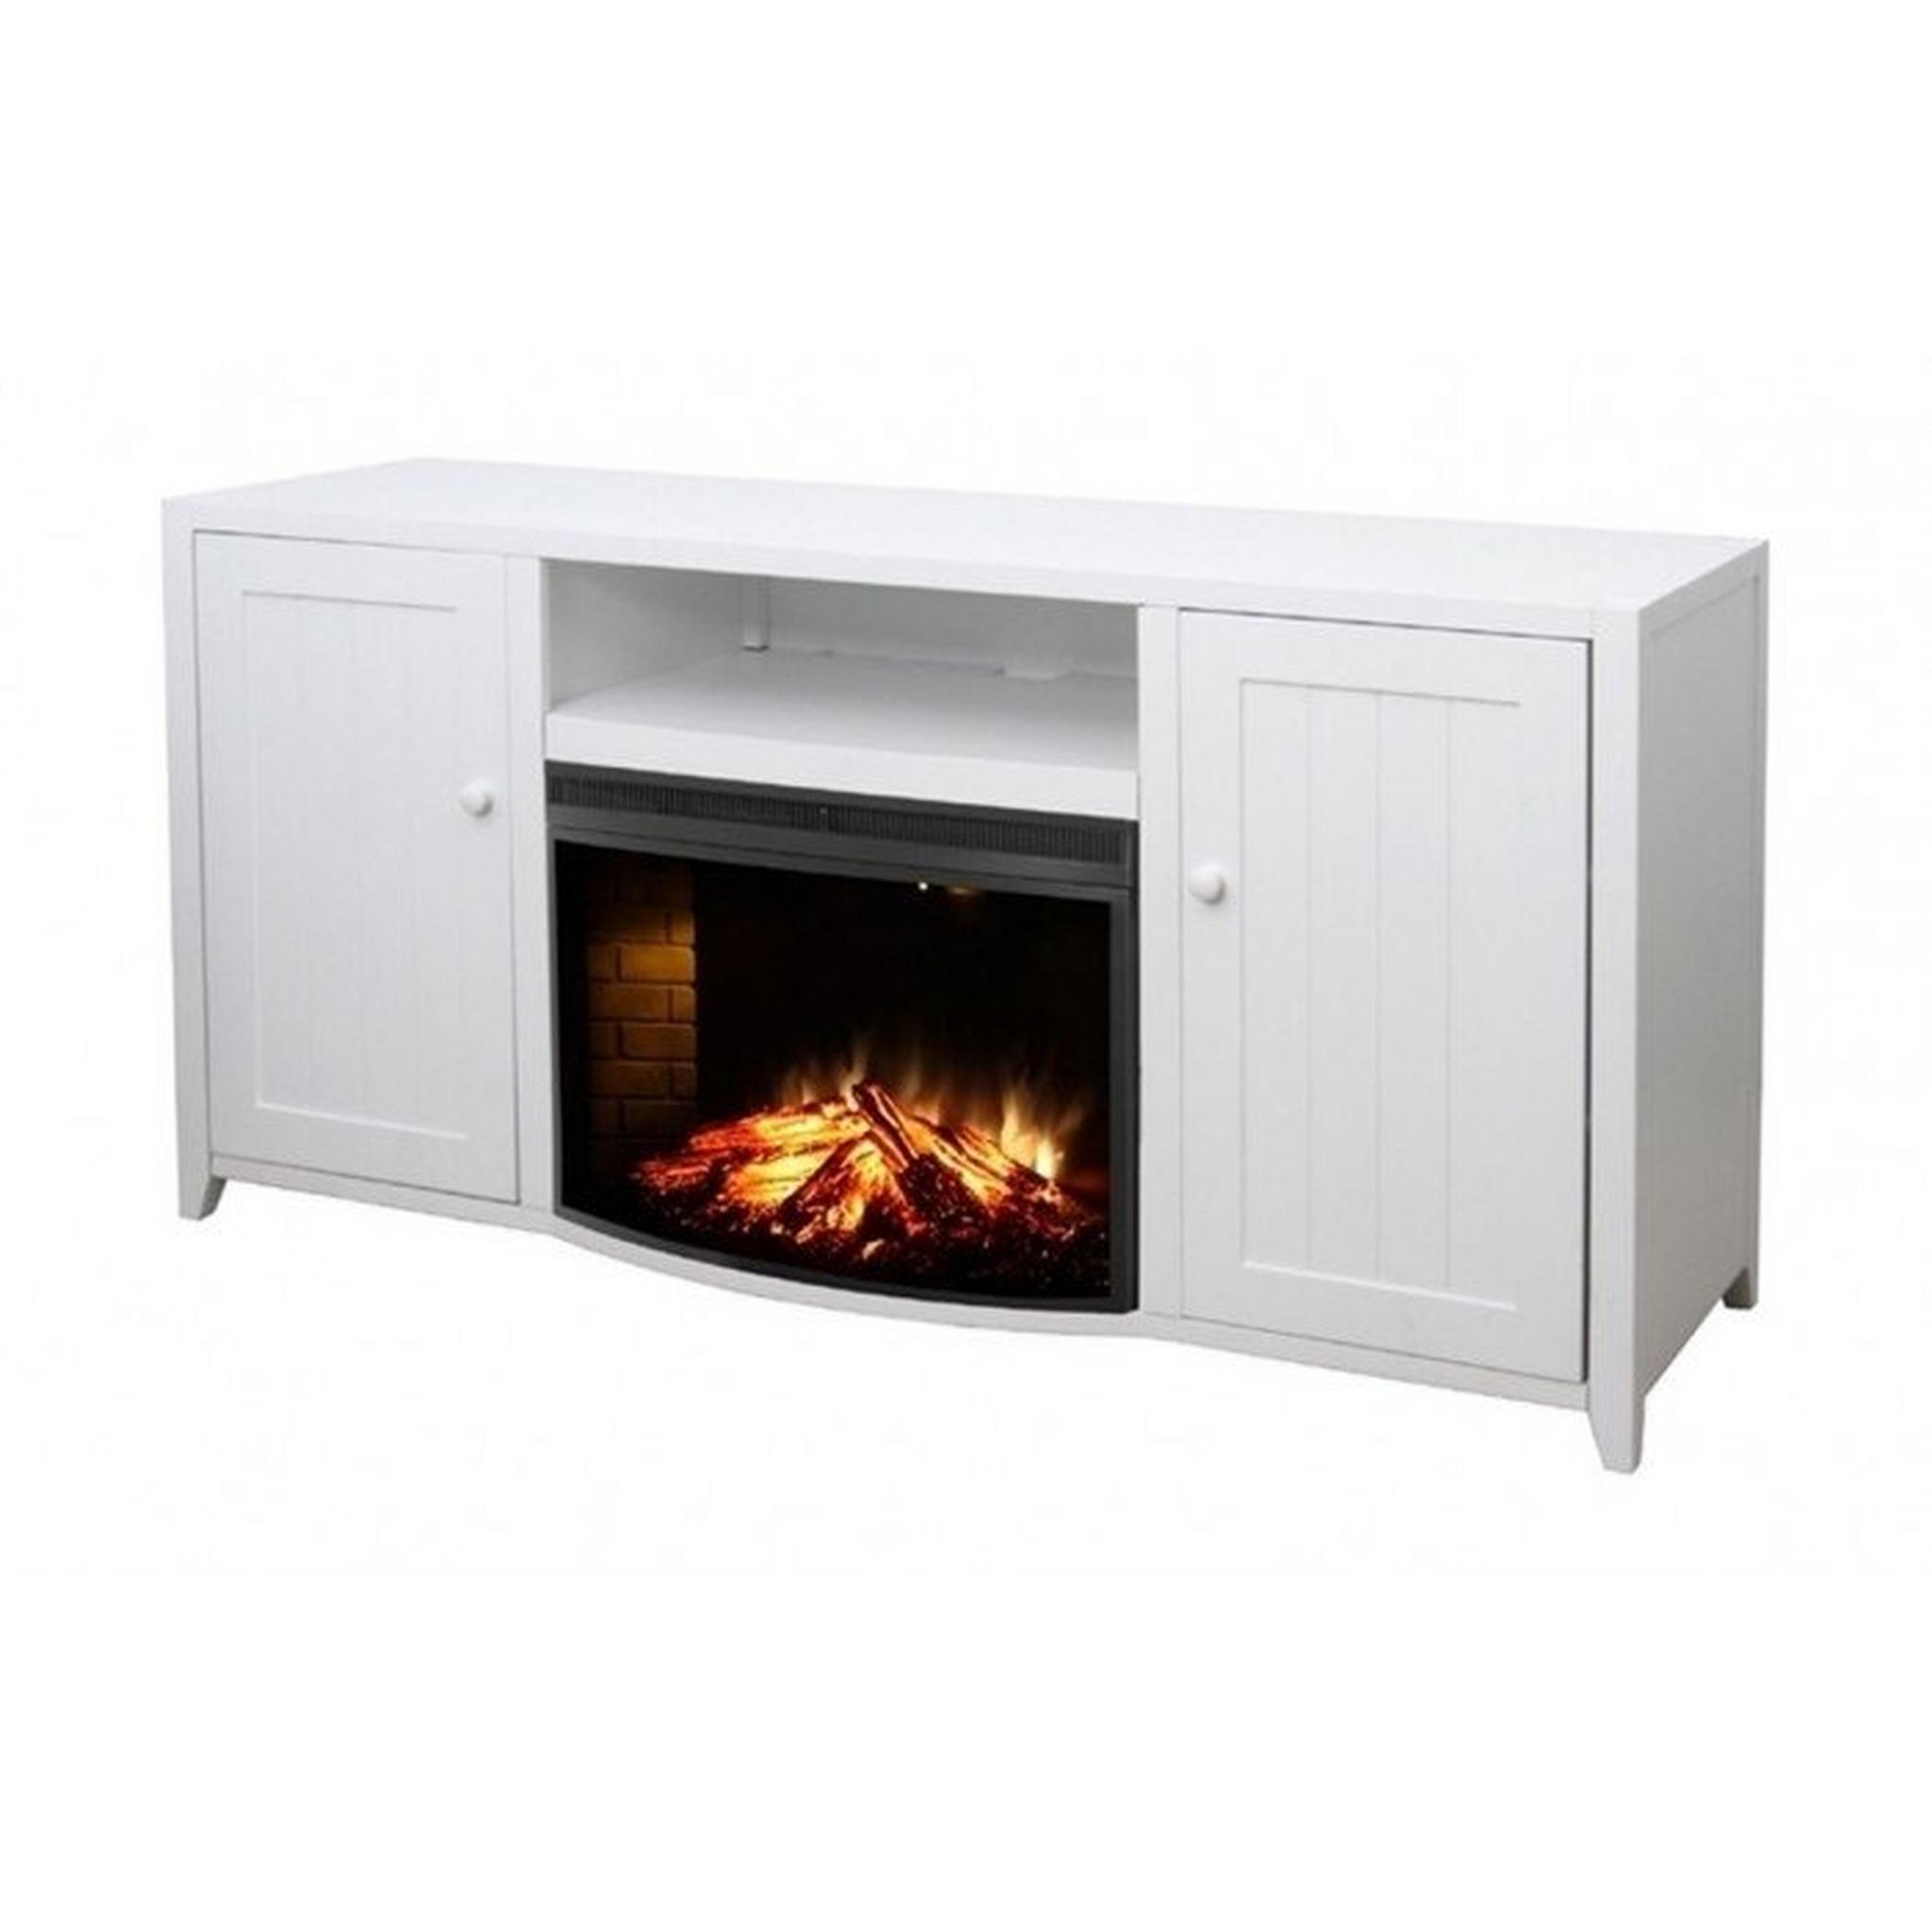 Wansa 65" TV Stand with Electric Fireplace - White (A-002FT) + Fireplace insert for TV Stand (SF122-26A)